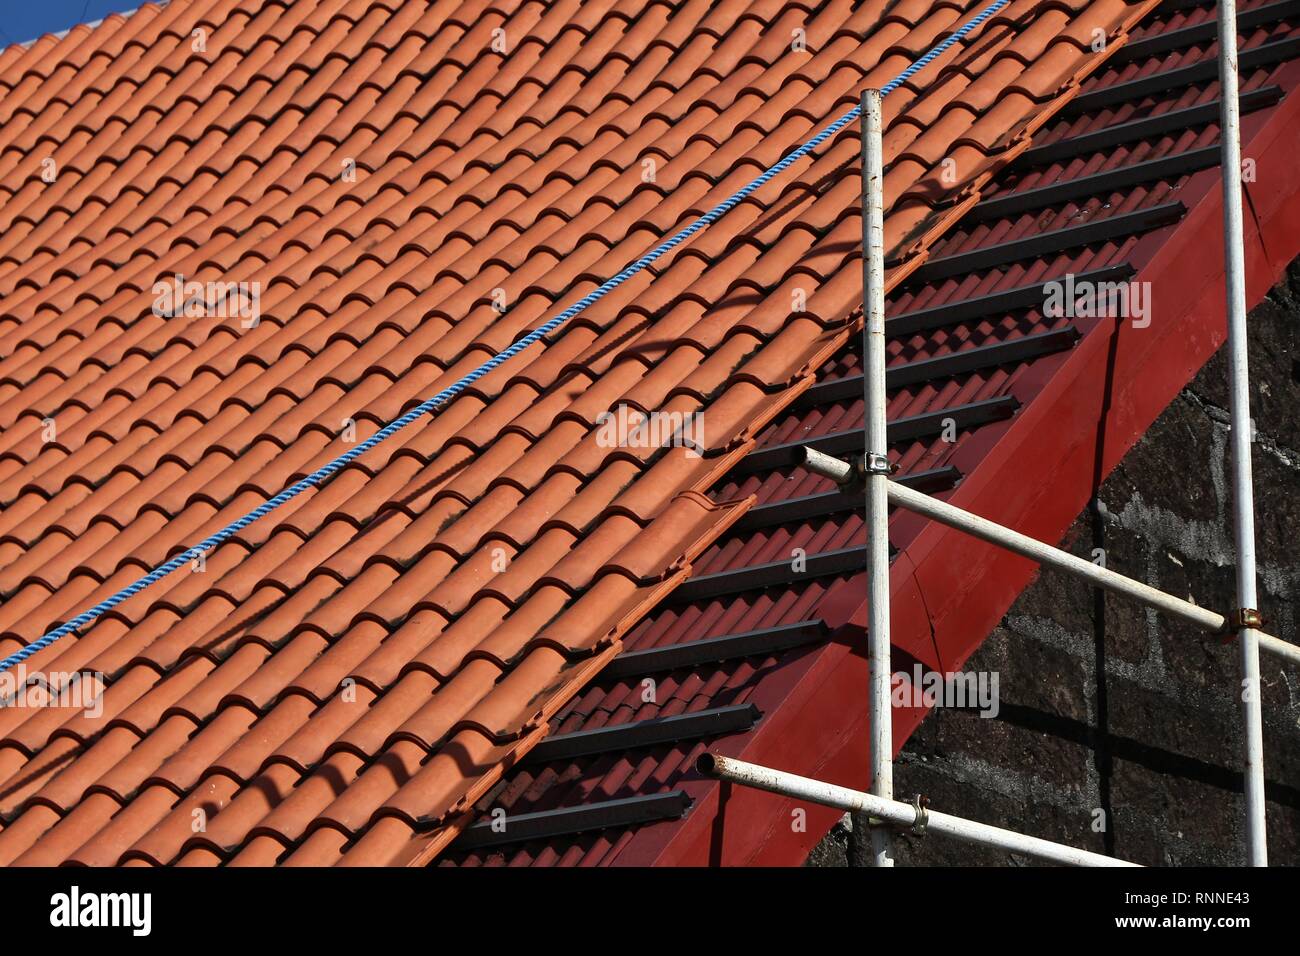 Roofing works in progress - ceramic tiles installed on old building in Philippines. Stock Photo